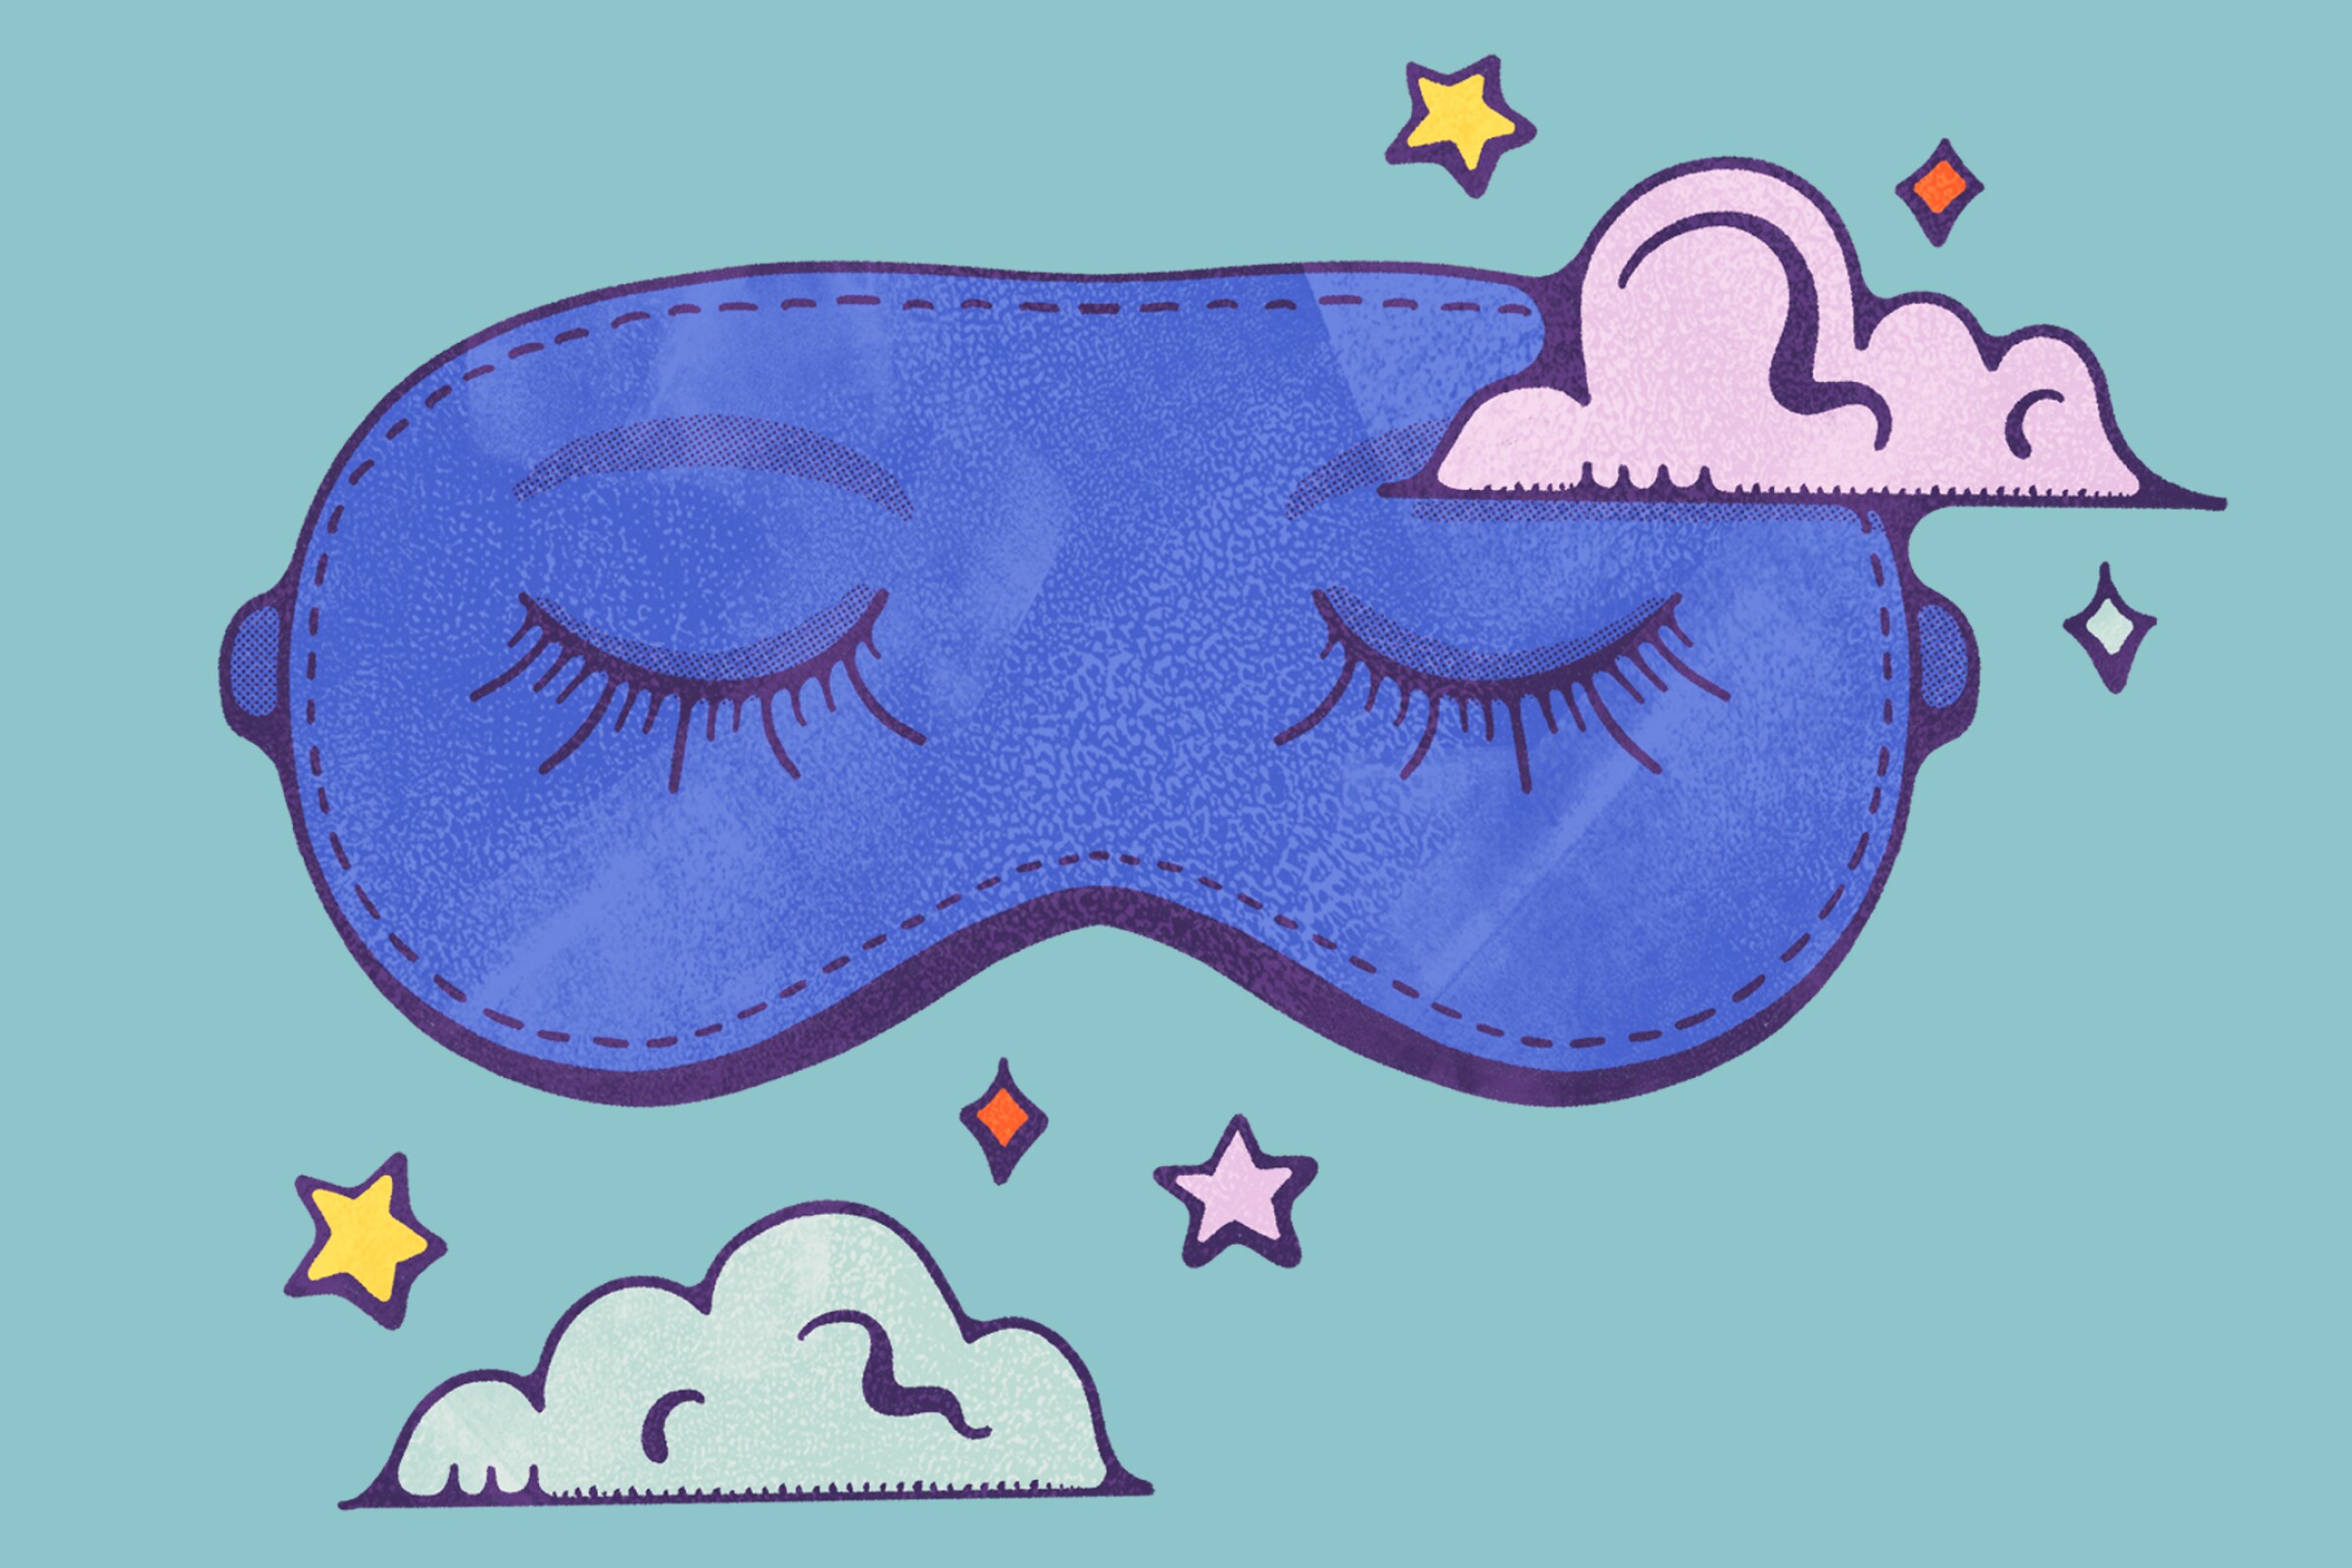 Illustration of a blue eye mask next to clouds